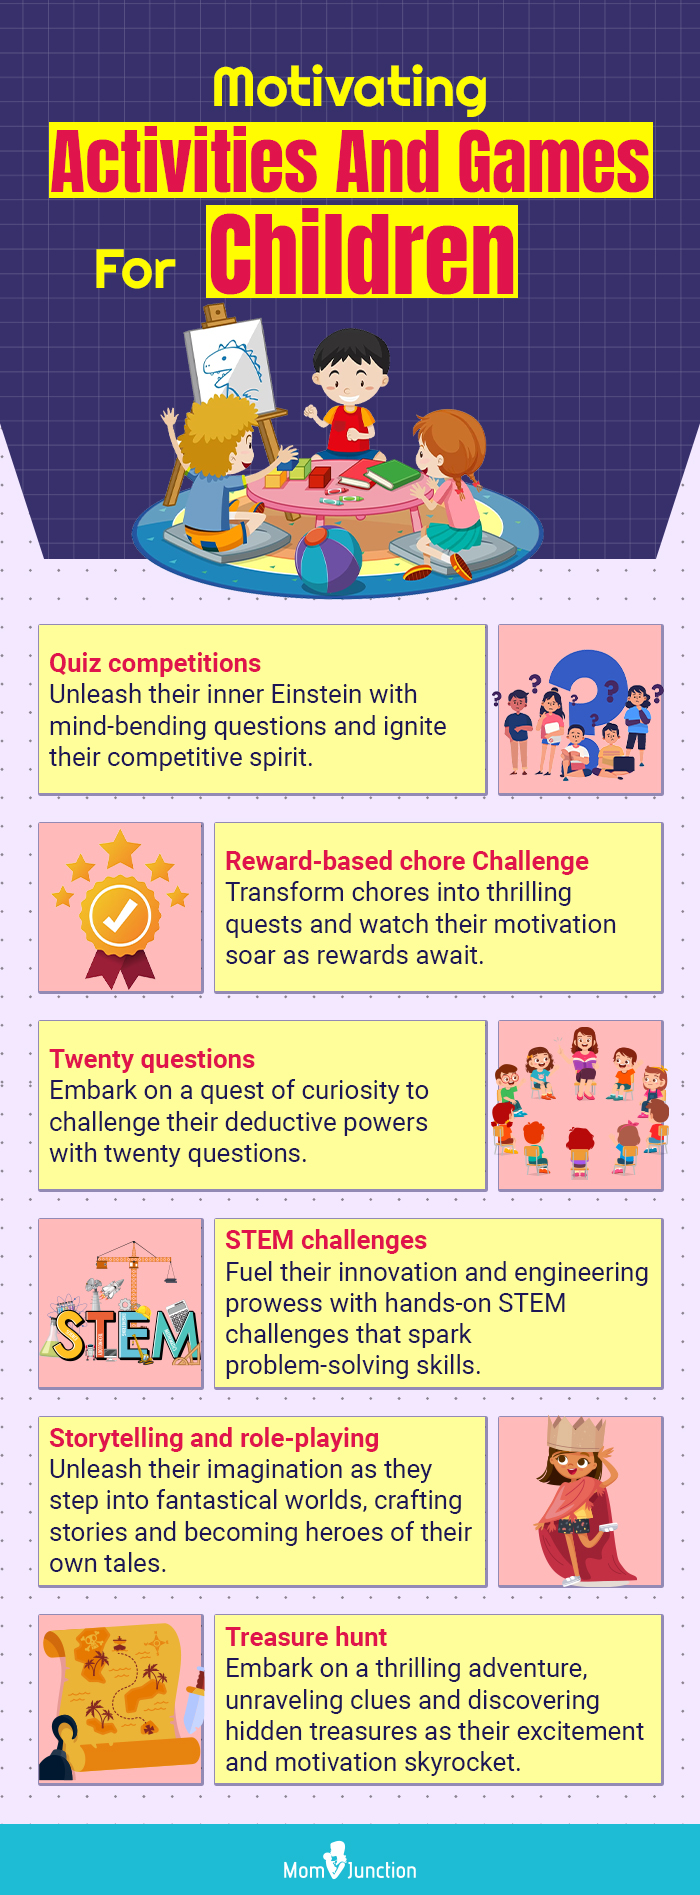 motivating activities and games for children (infographic)